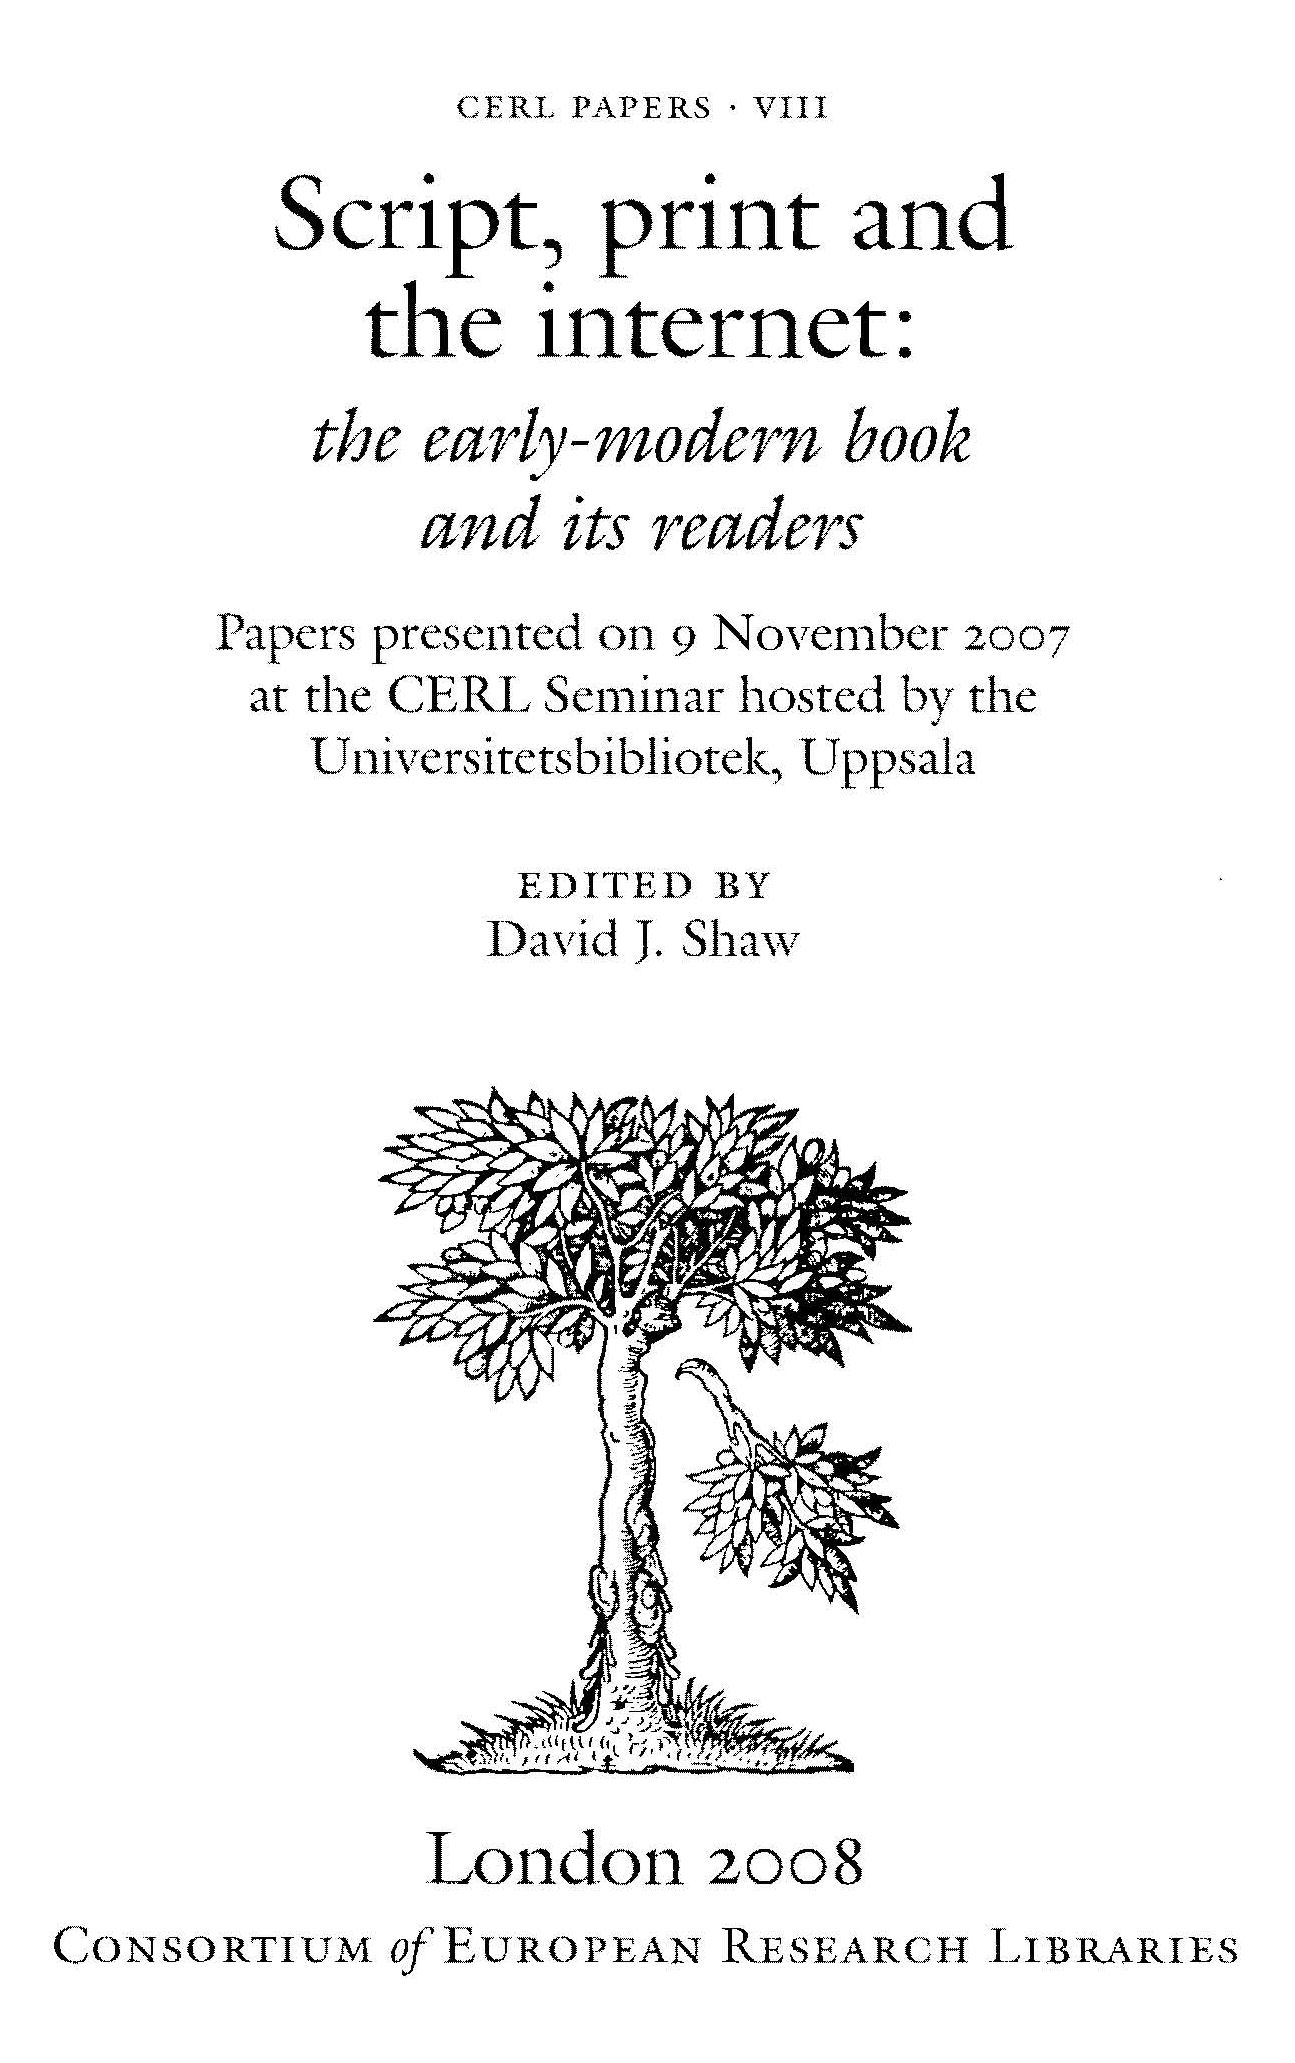 cerl_papers_viii_cover.jpg